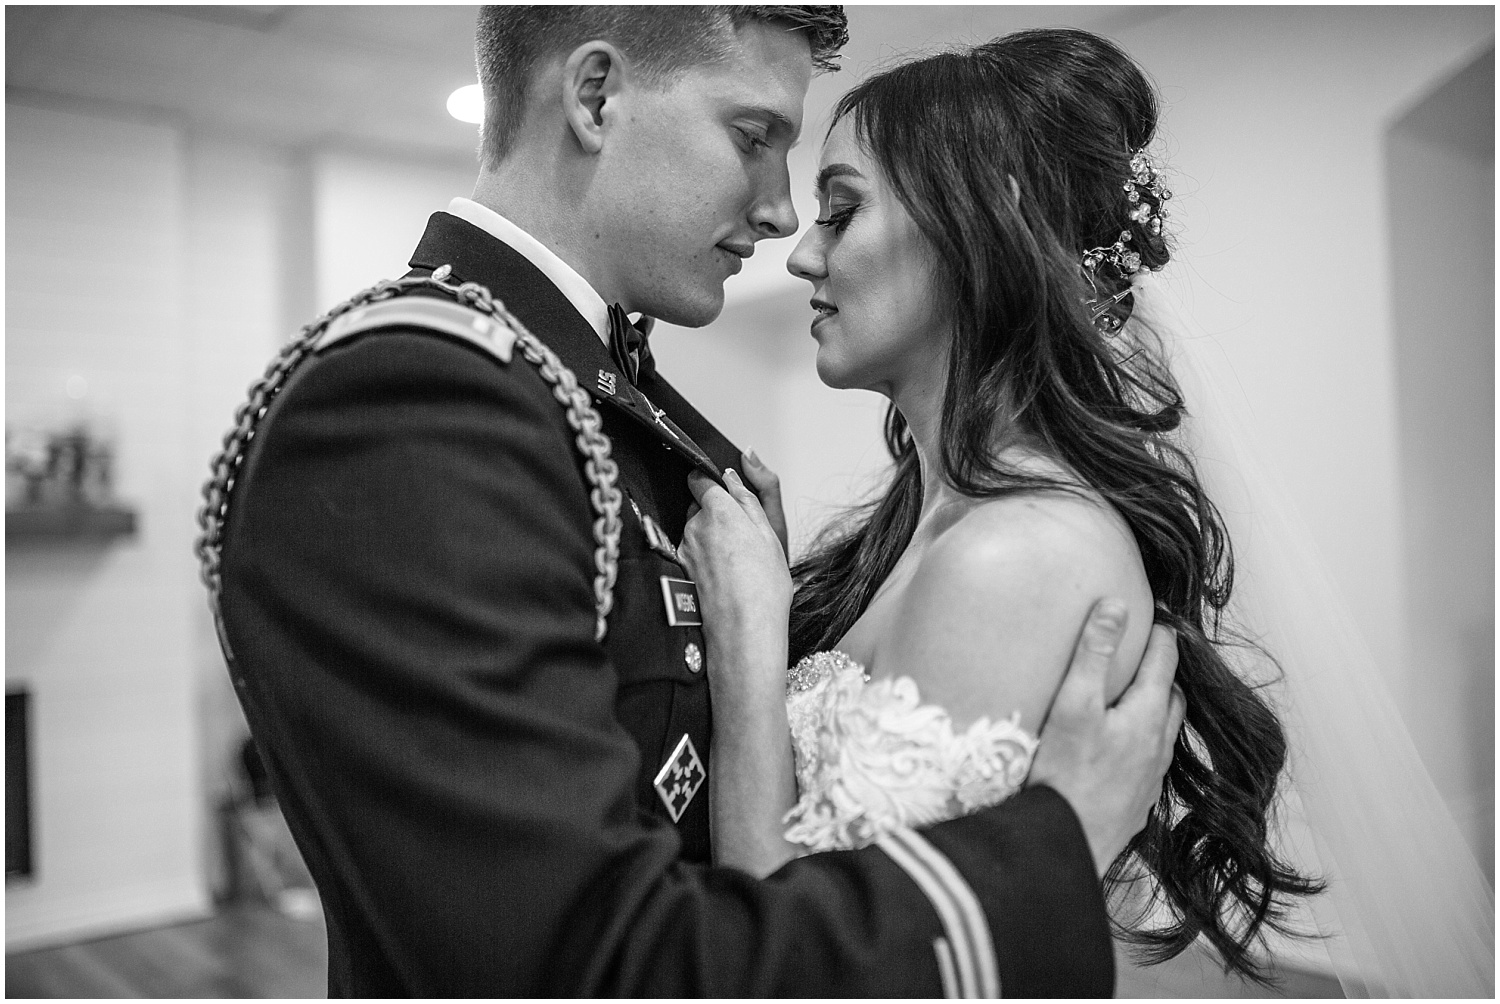 Romantic b&w portrait of bride and groom at military wedding